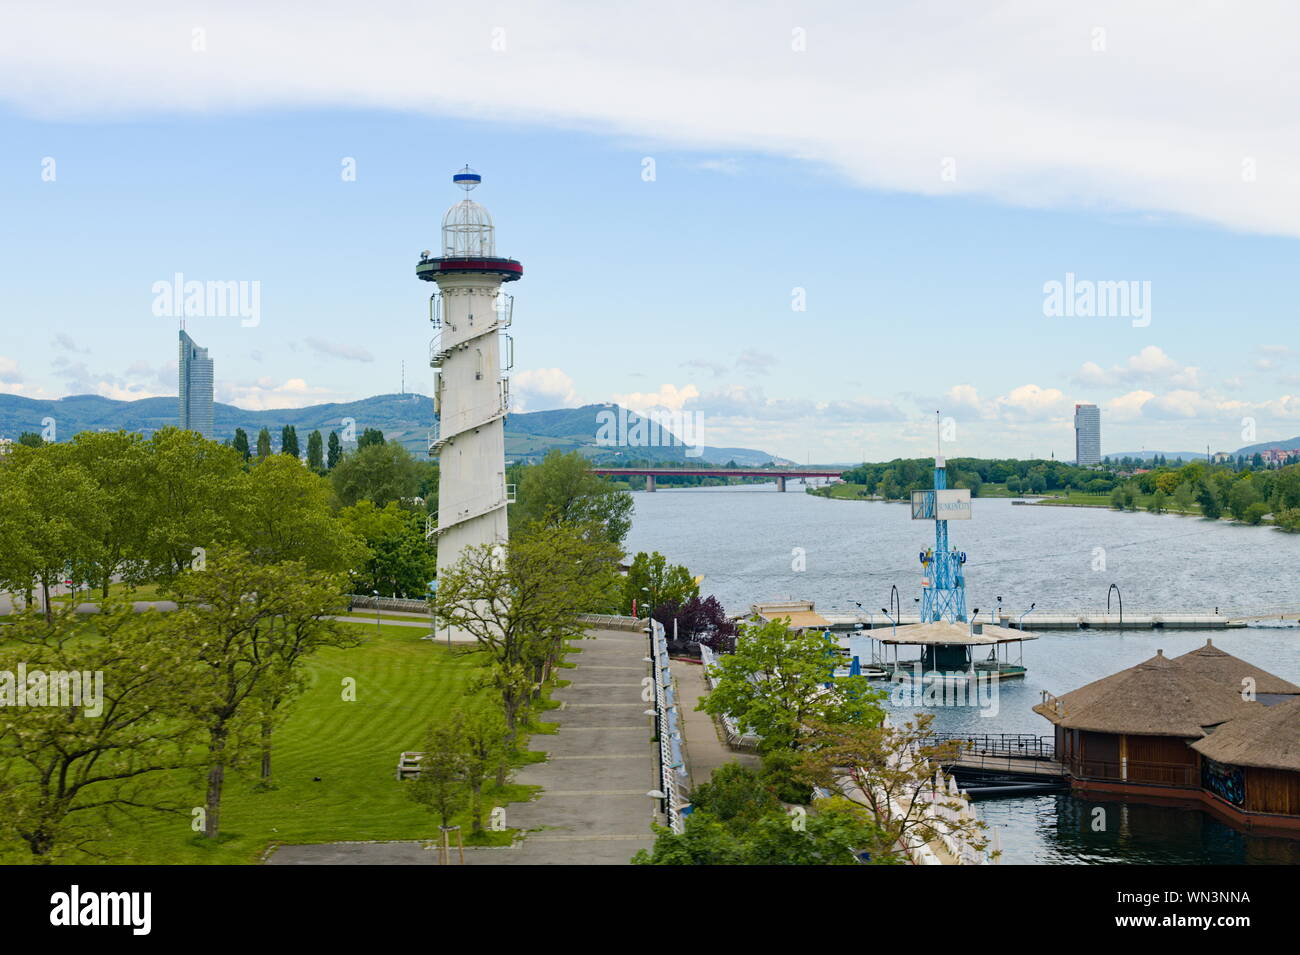 Lighthouse on the Donauinsel (Danube Island) Stock Photo